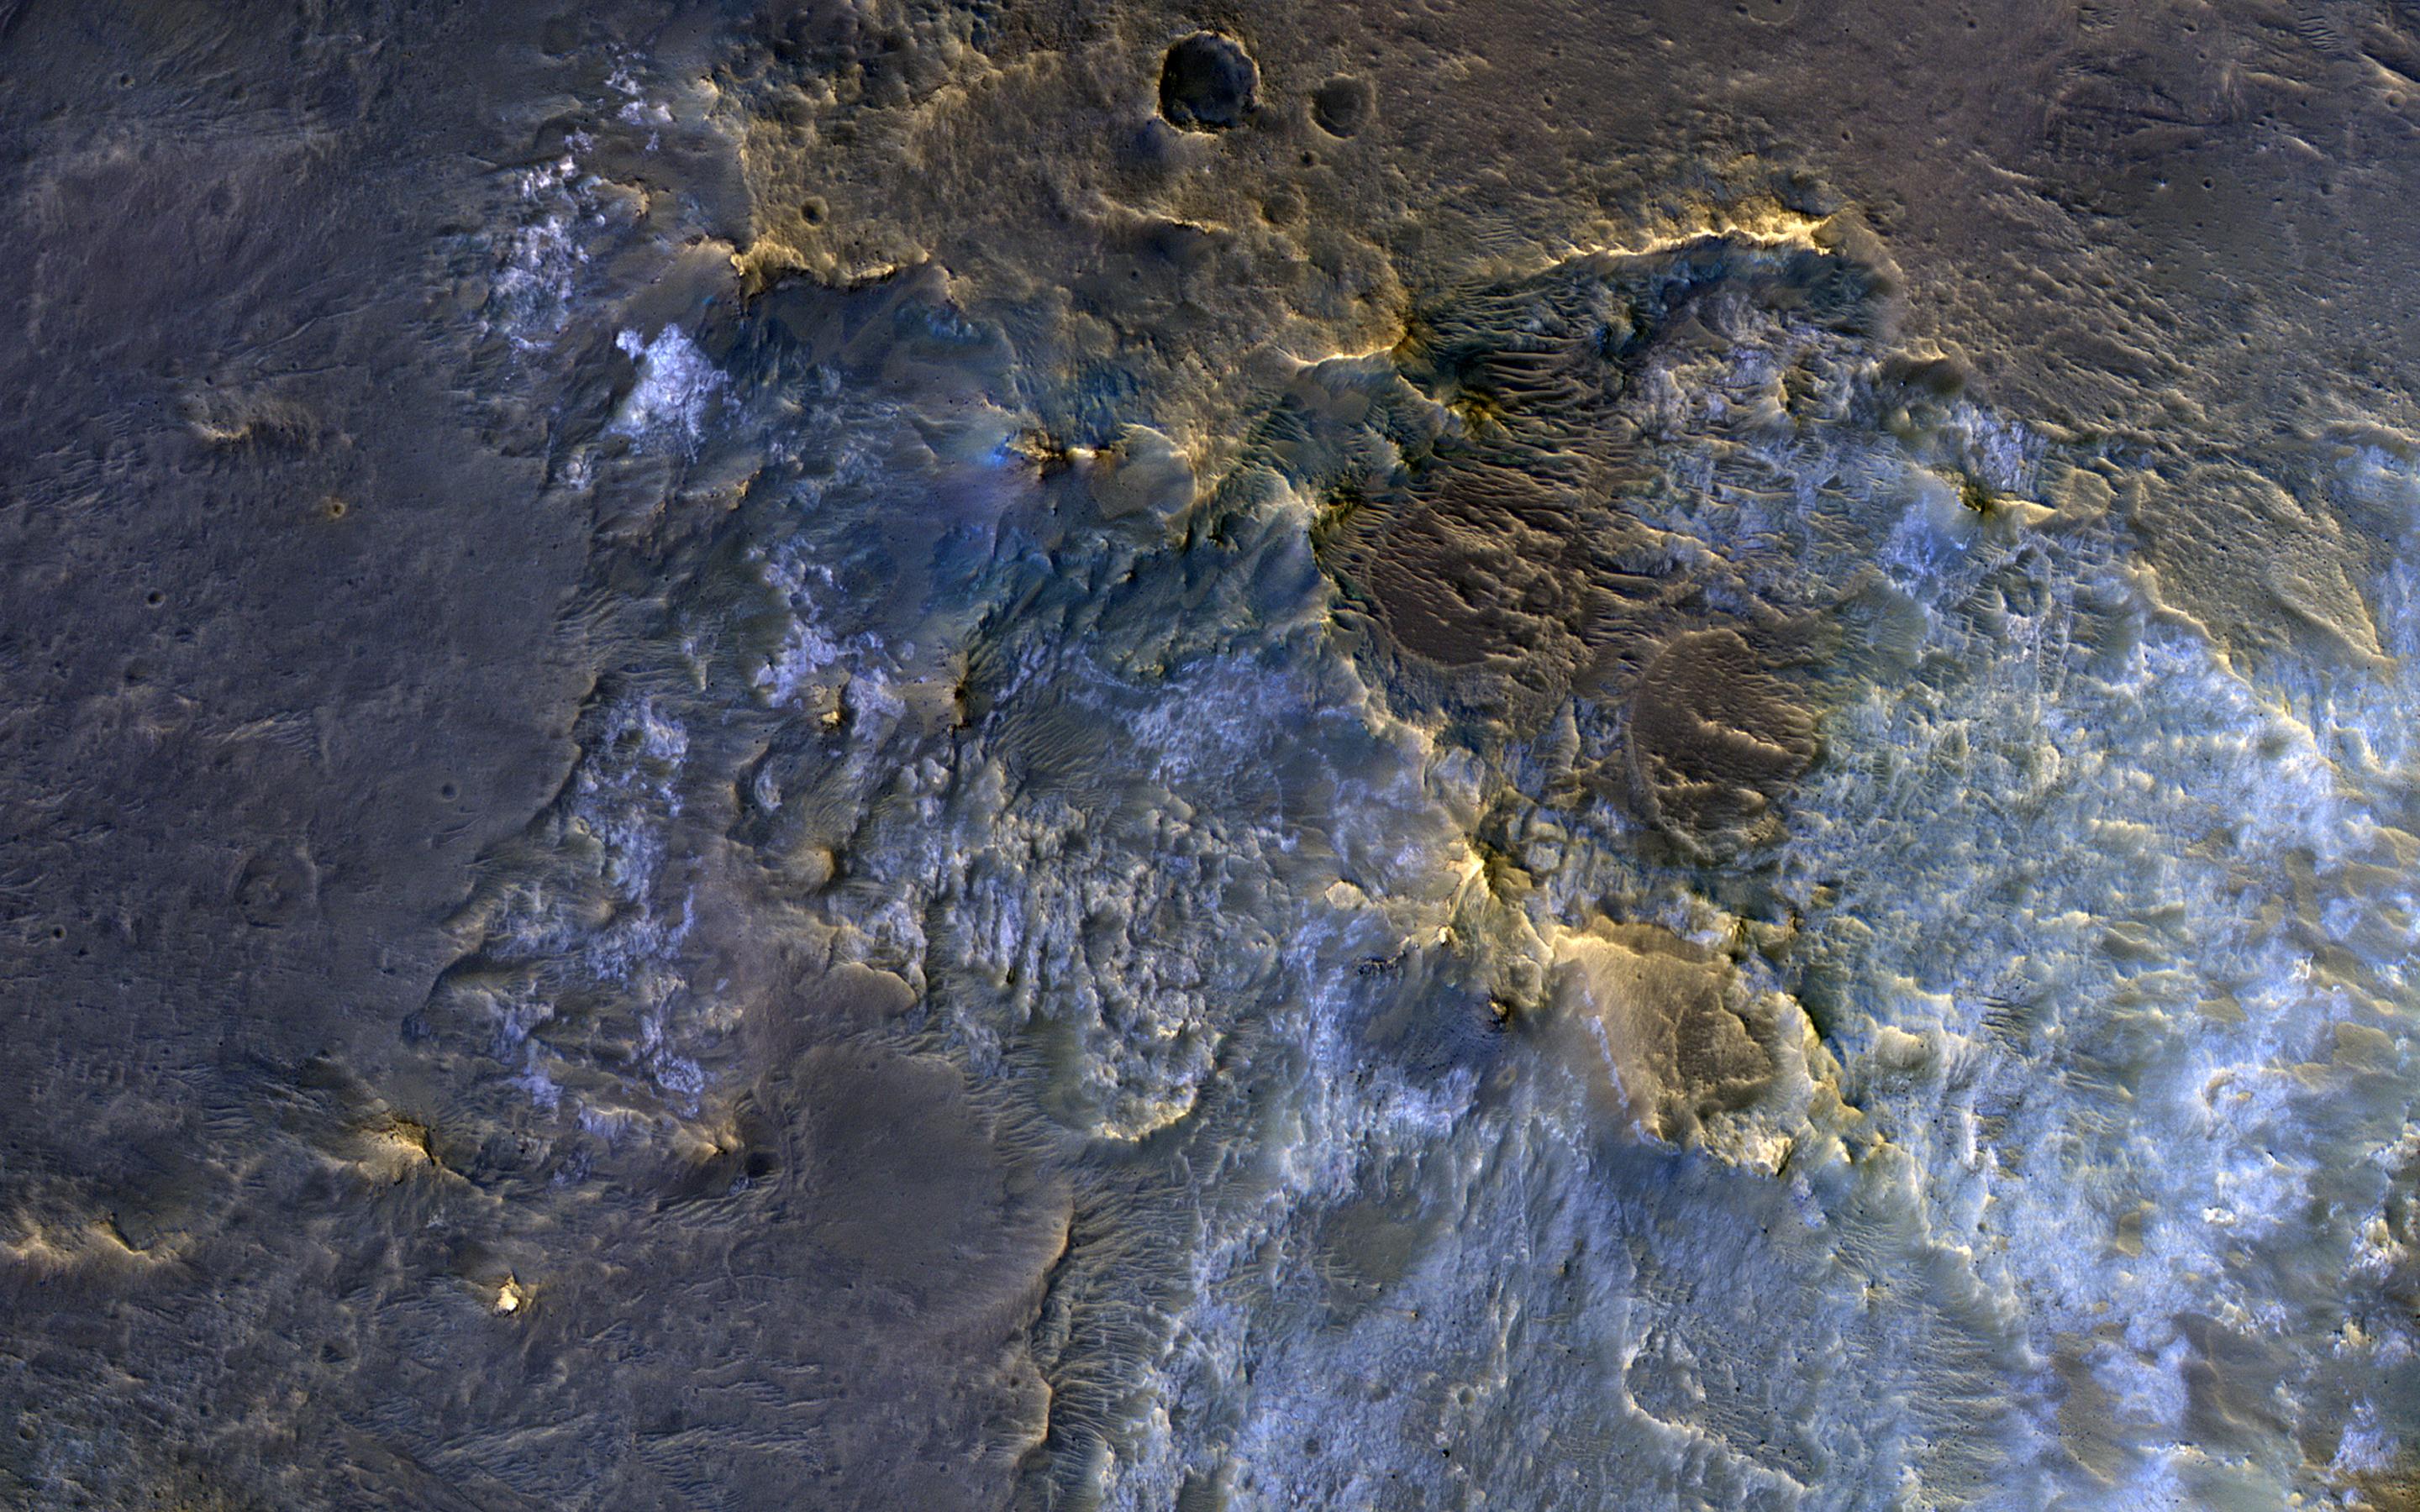 PIA23057: Exposing the Rock in Impact Craters